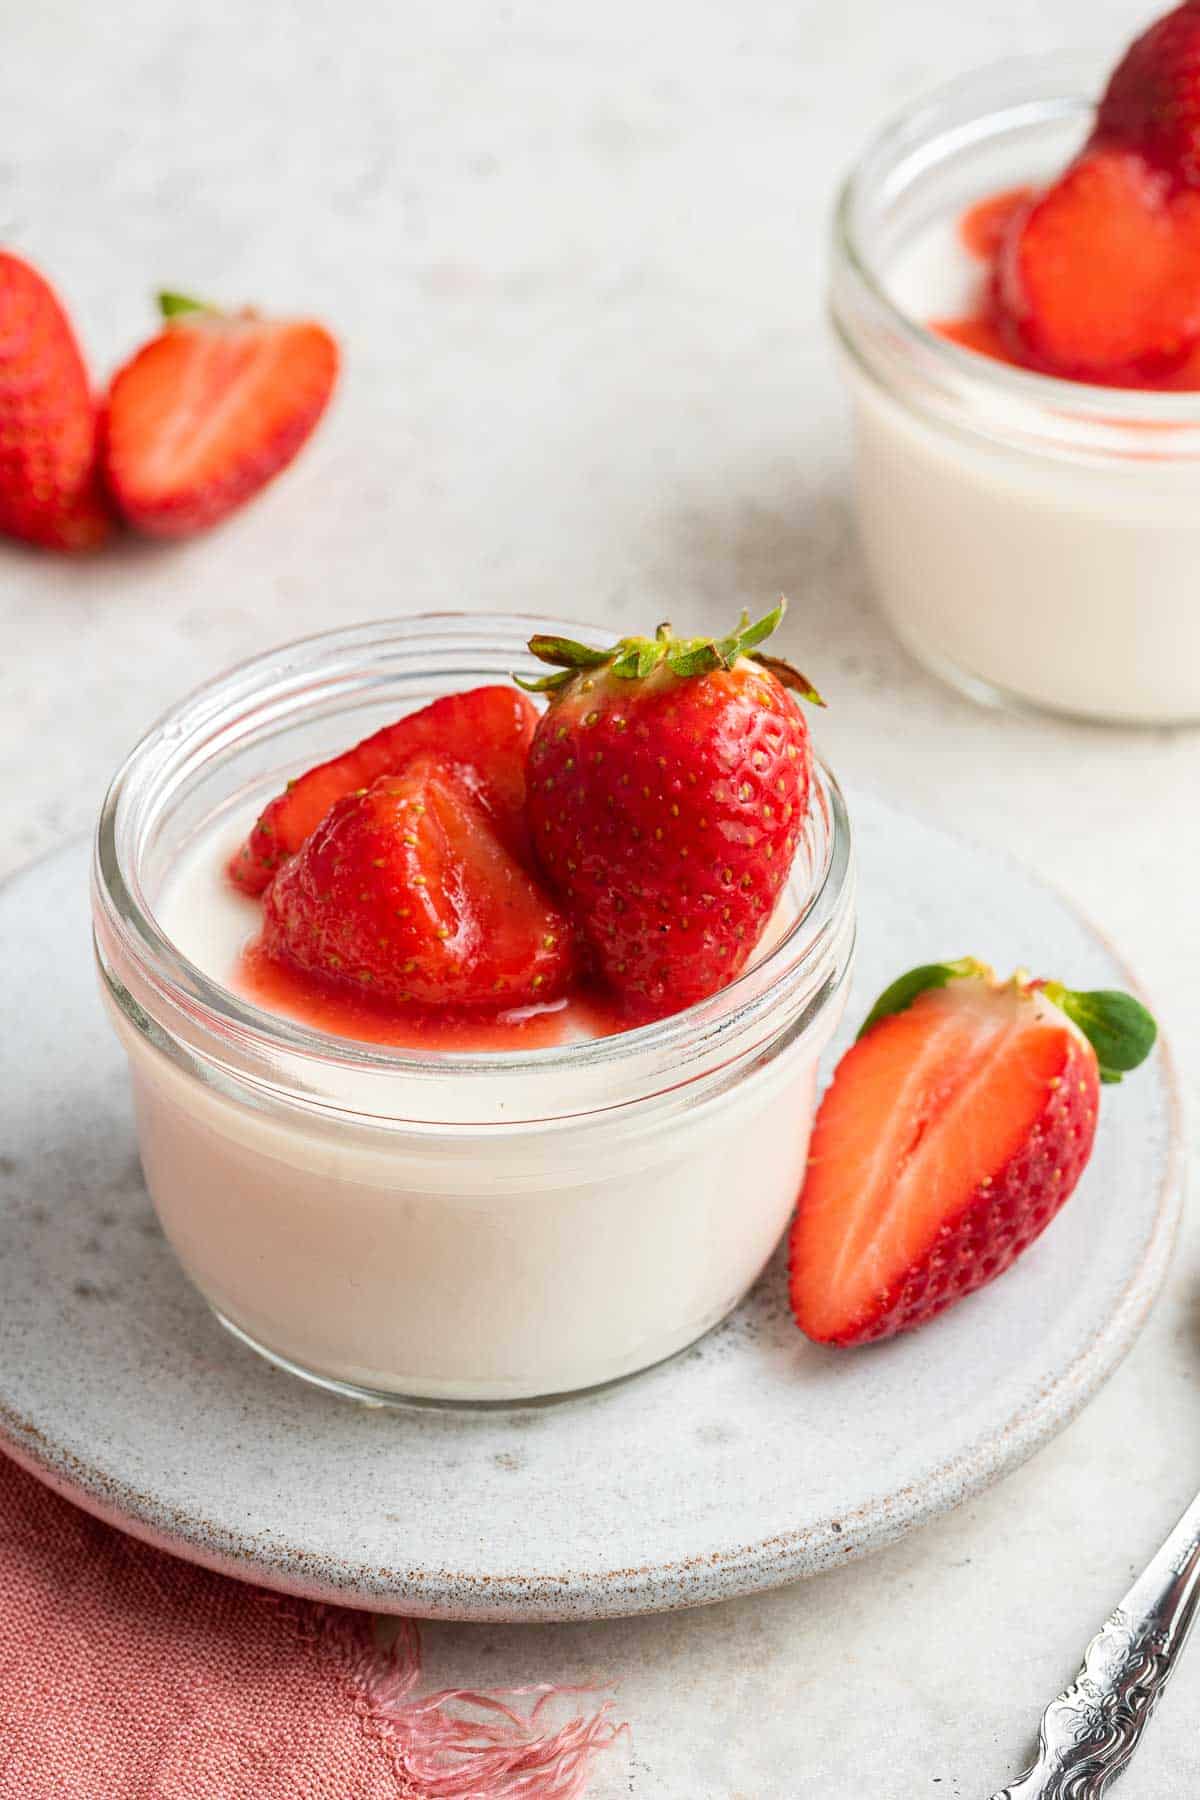 Panna Cotta Recipe with Strawberries - Dessert for Two